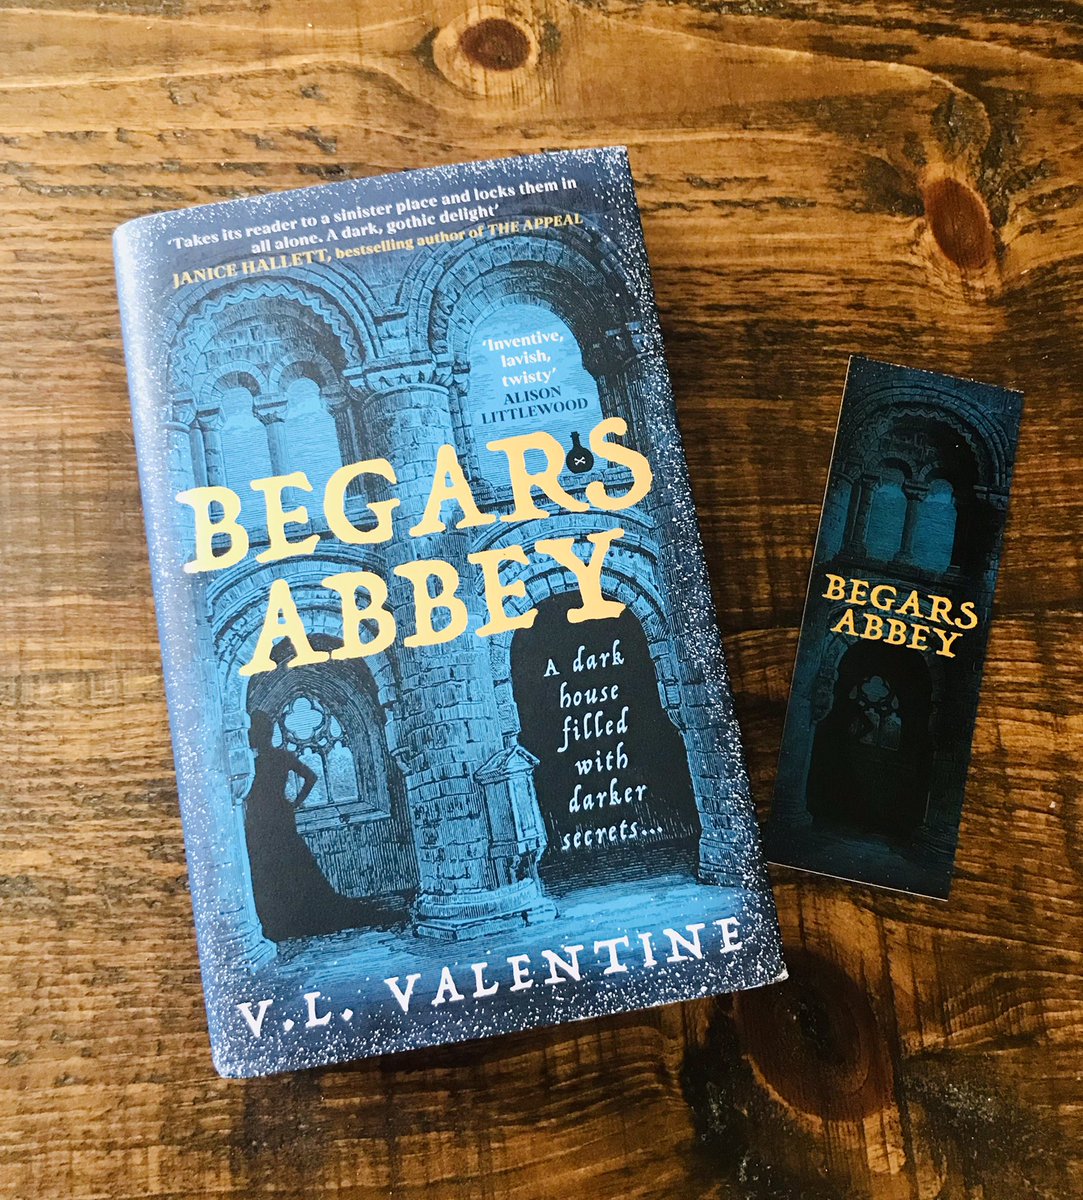 Thank you so much @ViperBooks for sending me a copy of #BegarsAbbey I can’t wait to read this!